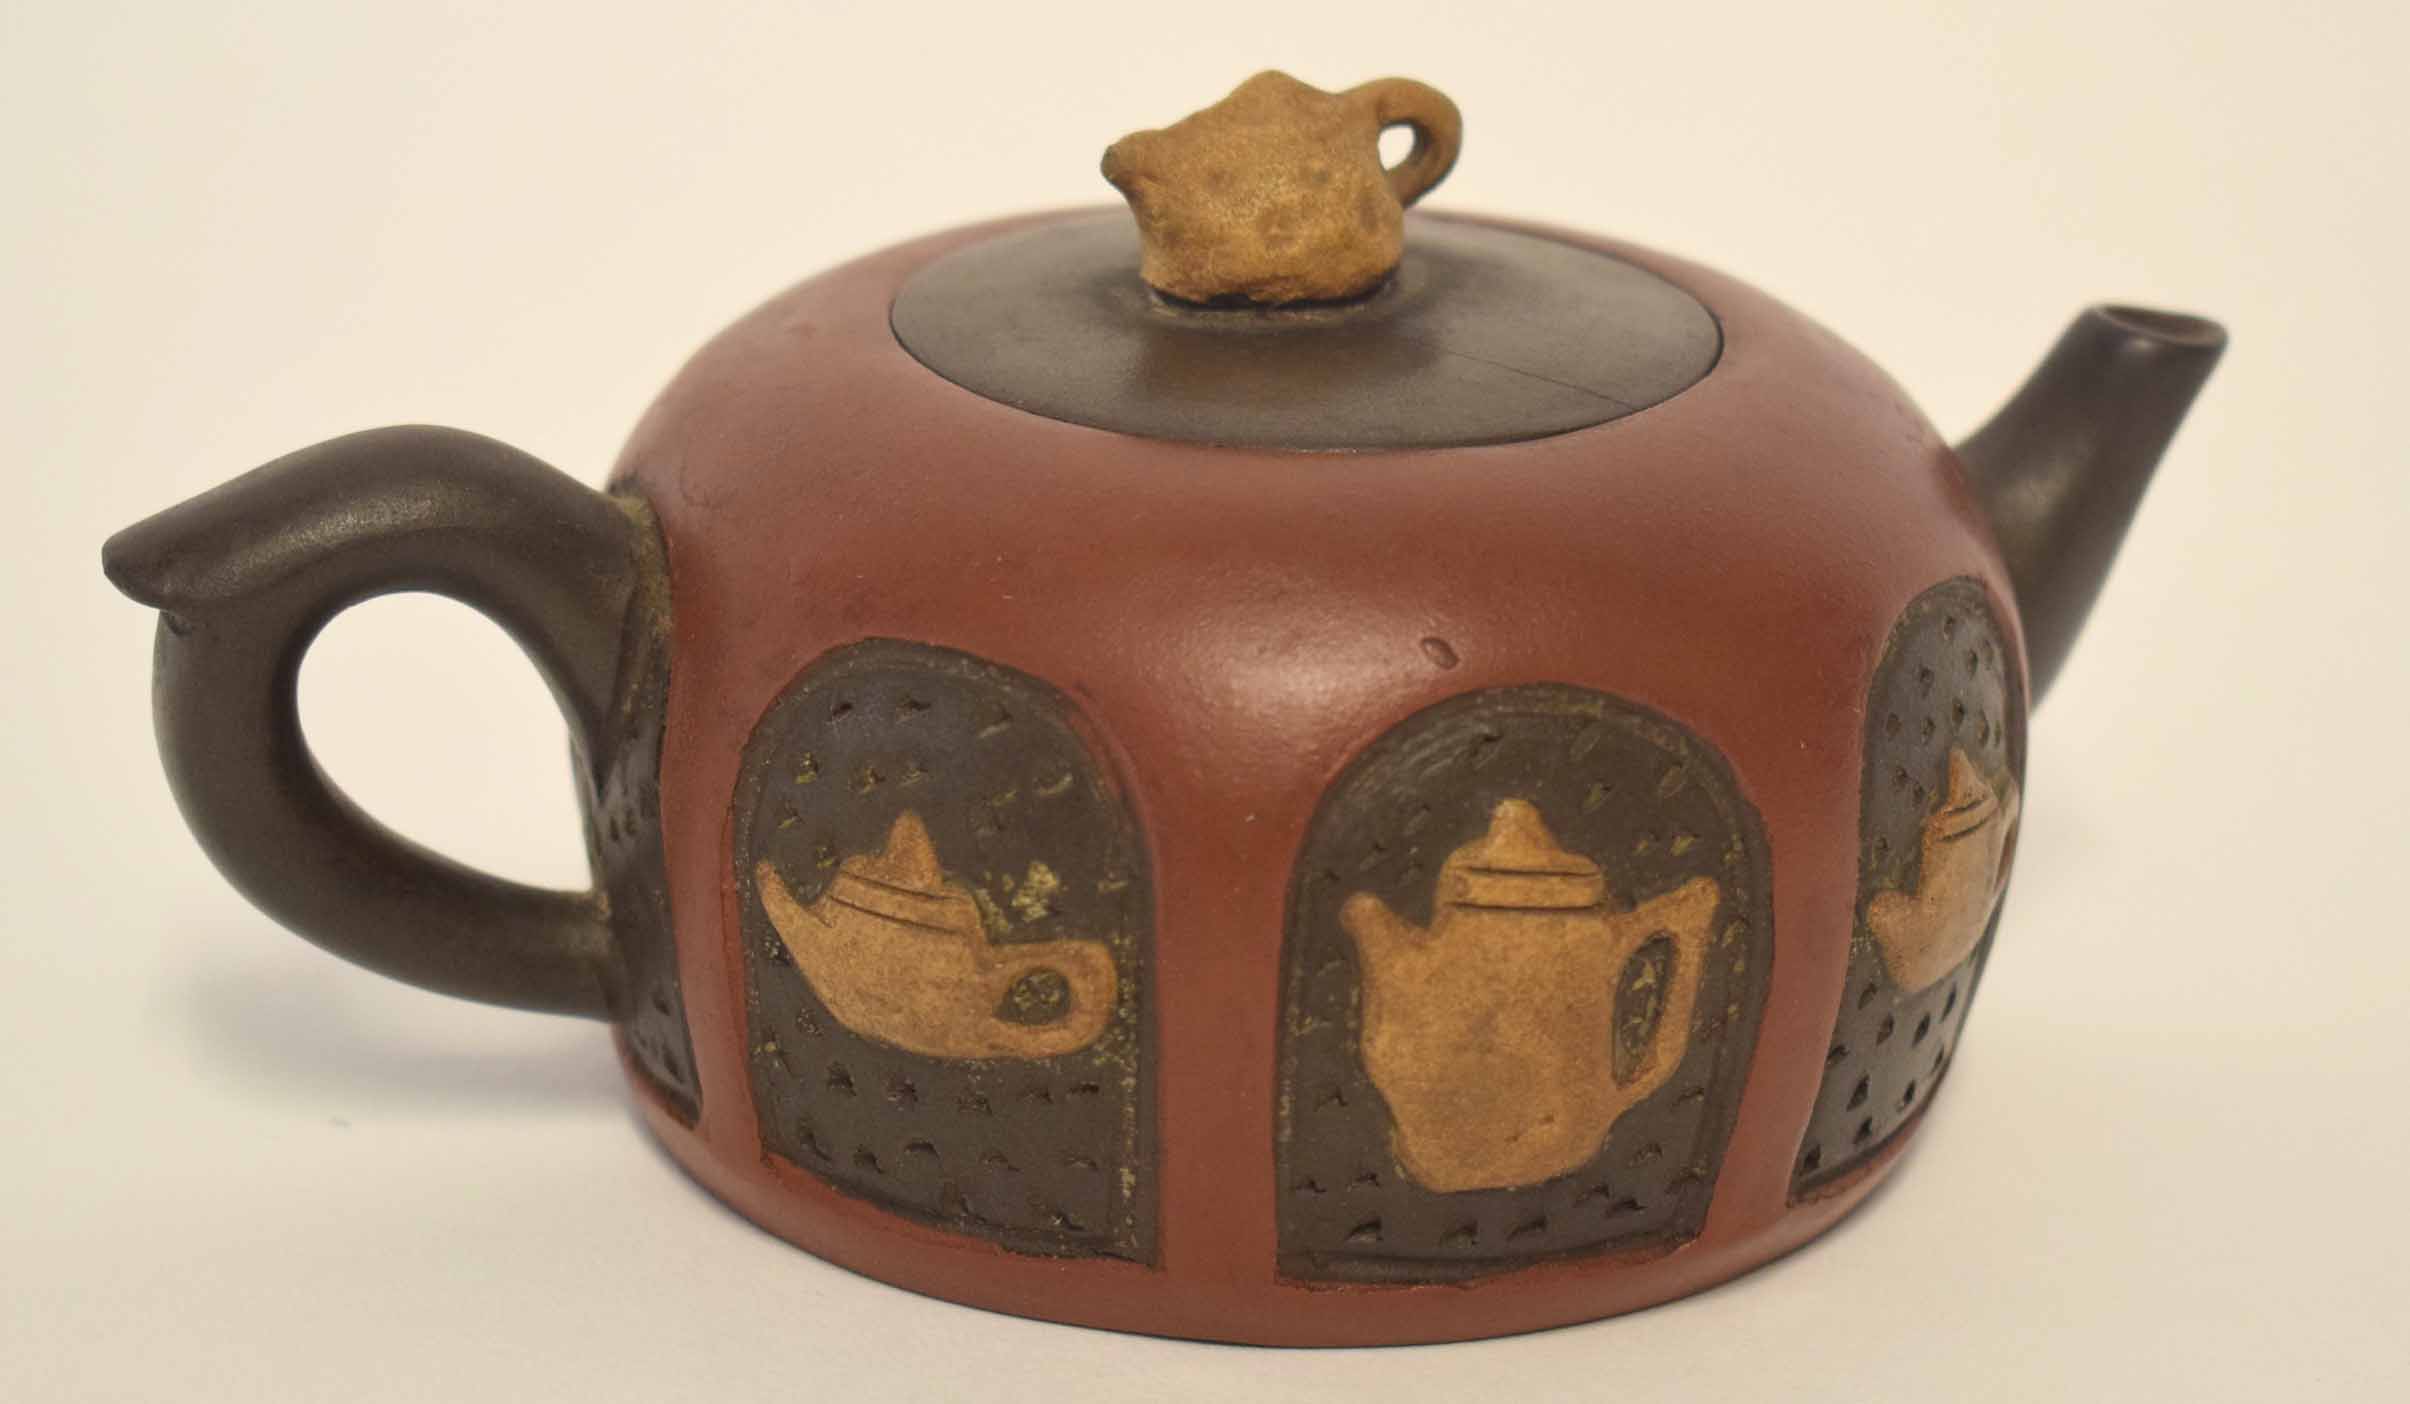 Chinese red ware teapot and cover, the body decorated with tea and coffee pot motifs, the cover with